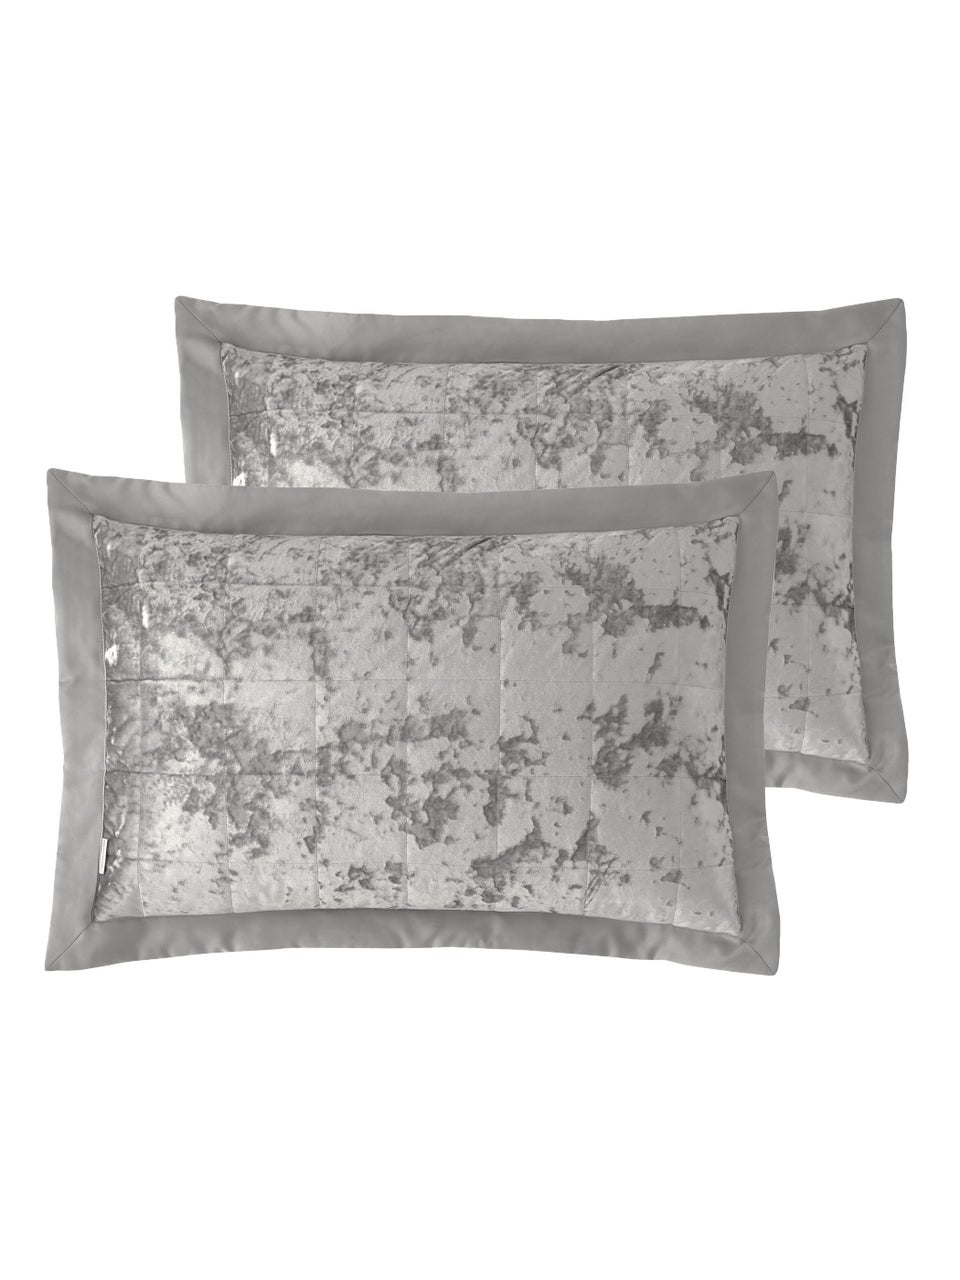 Catherine Lansfield Crushed Velvet Quilted Pillowcase Pair